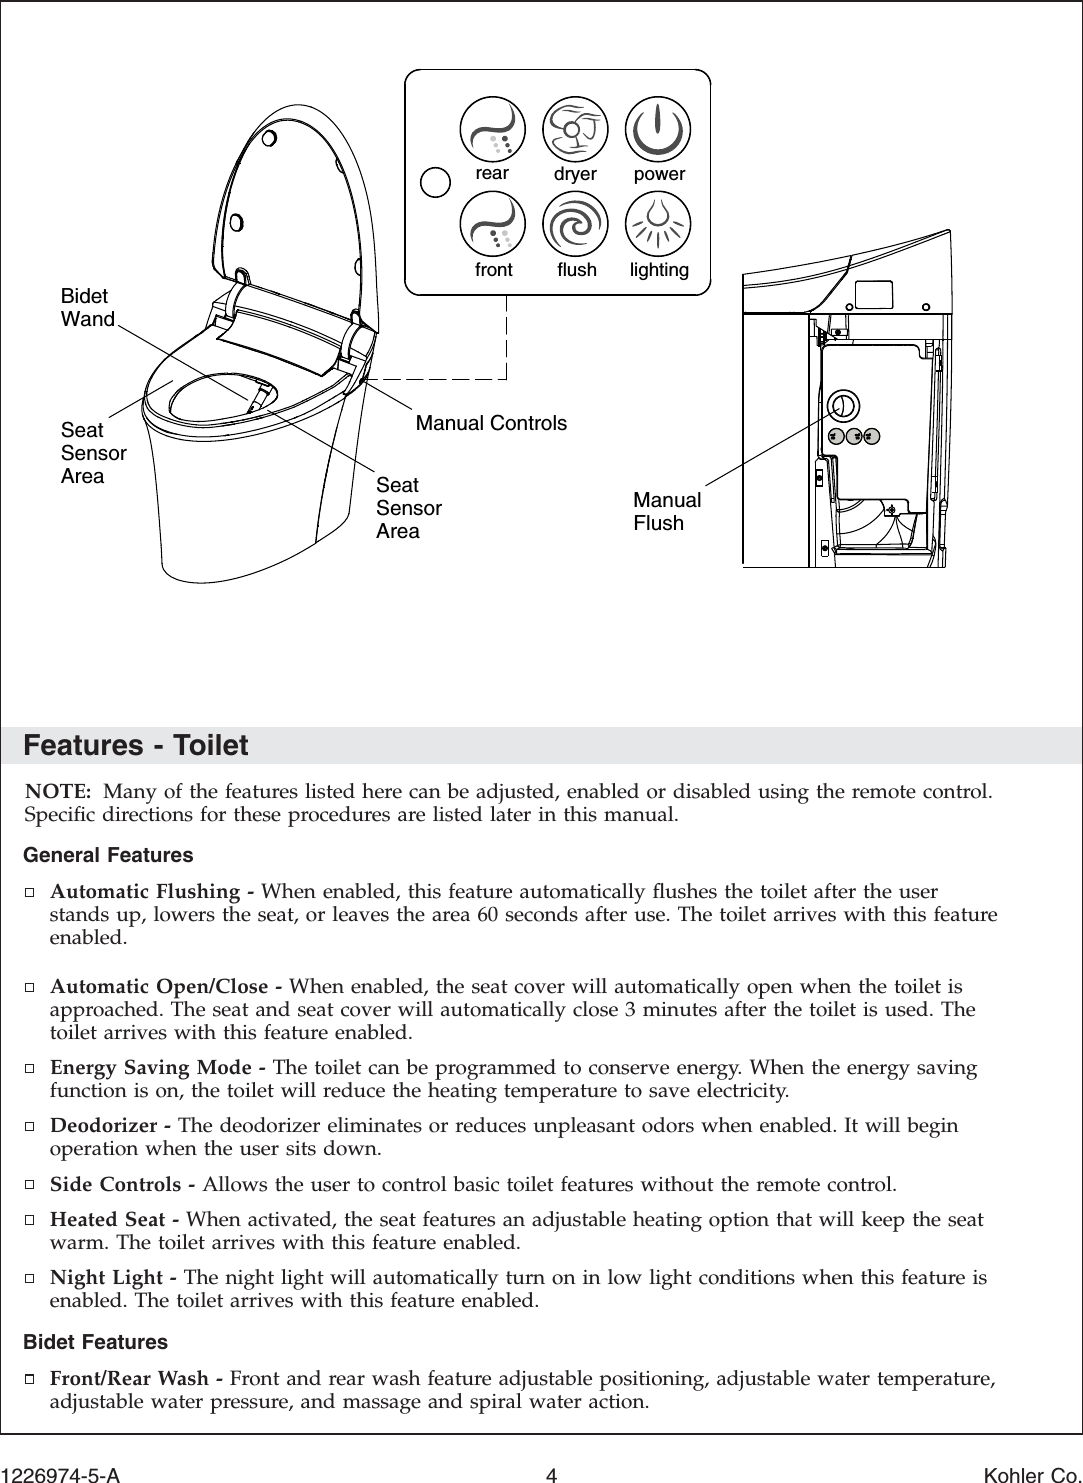 Features - ToiletNOTE: Many of the features listed here can be adjusted, enabled or disabled using the remote control.Speciﬁc directions for these procedures are listed later in this manual.General FeaturesAutomatic Flushing - When enabled, this feature automatically ﬂushes the toilet after the userstands up, lowers the seat, or leaves the area 60 seconds after use. The toilet arrives with this featureenabled.Automatic Open/Close - When enabled, the seat cover will automatically open when the toilet isapproached. The seat and seat cover will automatically close 3 minutes after the toilet is used. Thetoilet arrives with this feature enabled.Energy Saving Mode - The toilet can be programmed to conserve energy. When the energy savingfunction is on, the toilet will reduce the heating temperature to save electricity.Deodorizer - The deodorizer eliminates or reduces unpleasant odors when enabled. It will beginoperation when the user sits down.Side Controls - Allows the user to control basic toilet features without the remote control.Heated Seat - When activated, the seat features an adjustable heating option that will keep the seatwarm. The toilet arrives with this feature enabled.Night Light - The night light will automatically turn on in low light conditions when this feature isenabled. The toilet arrives with this feature enabled.Bidet FeaturesFront/Rear Wash - Front and rear wash feature adjustable positioning, adjustable water temperature,adjustable water pressure, and massage and spiral water action.ManualFlushManual ControlsSeat SensorAreaBidet WandSeat SensorArearear dryer powerfront flush lighting1226974-5-A 4 Kohler Co.